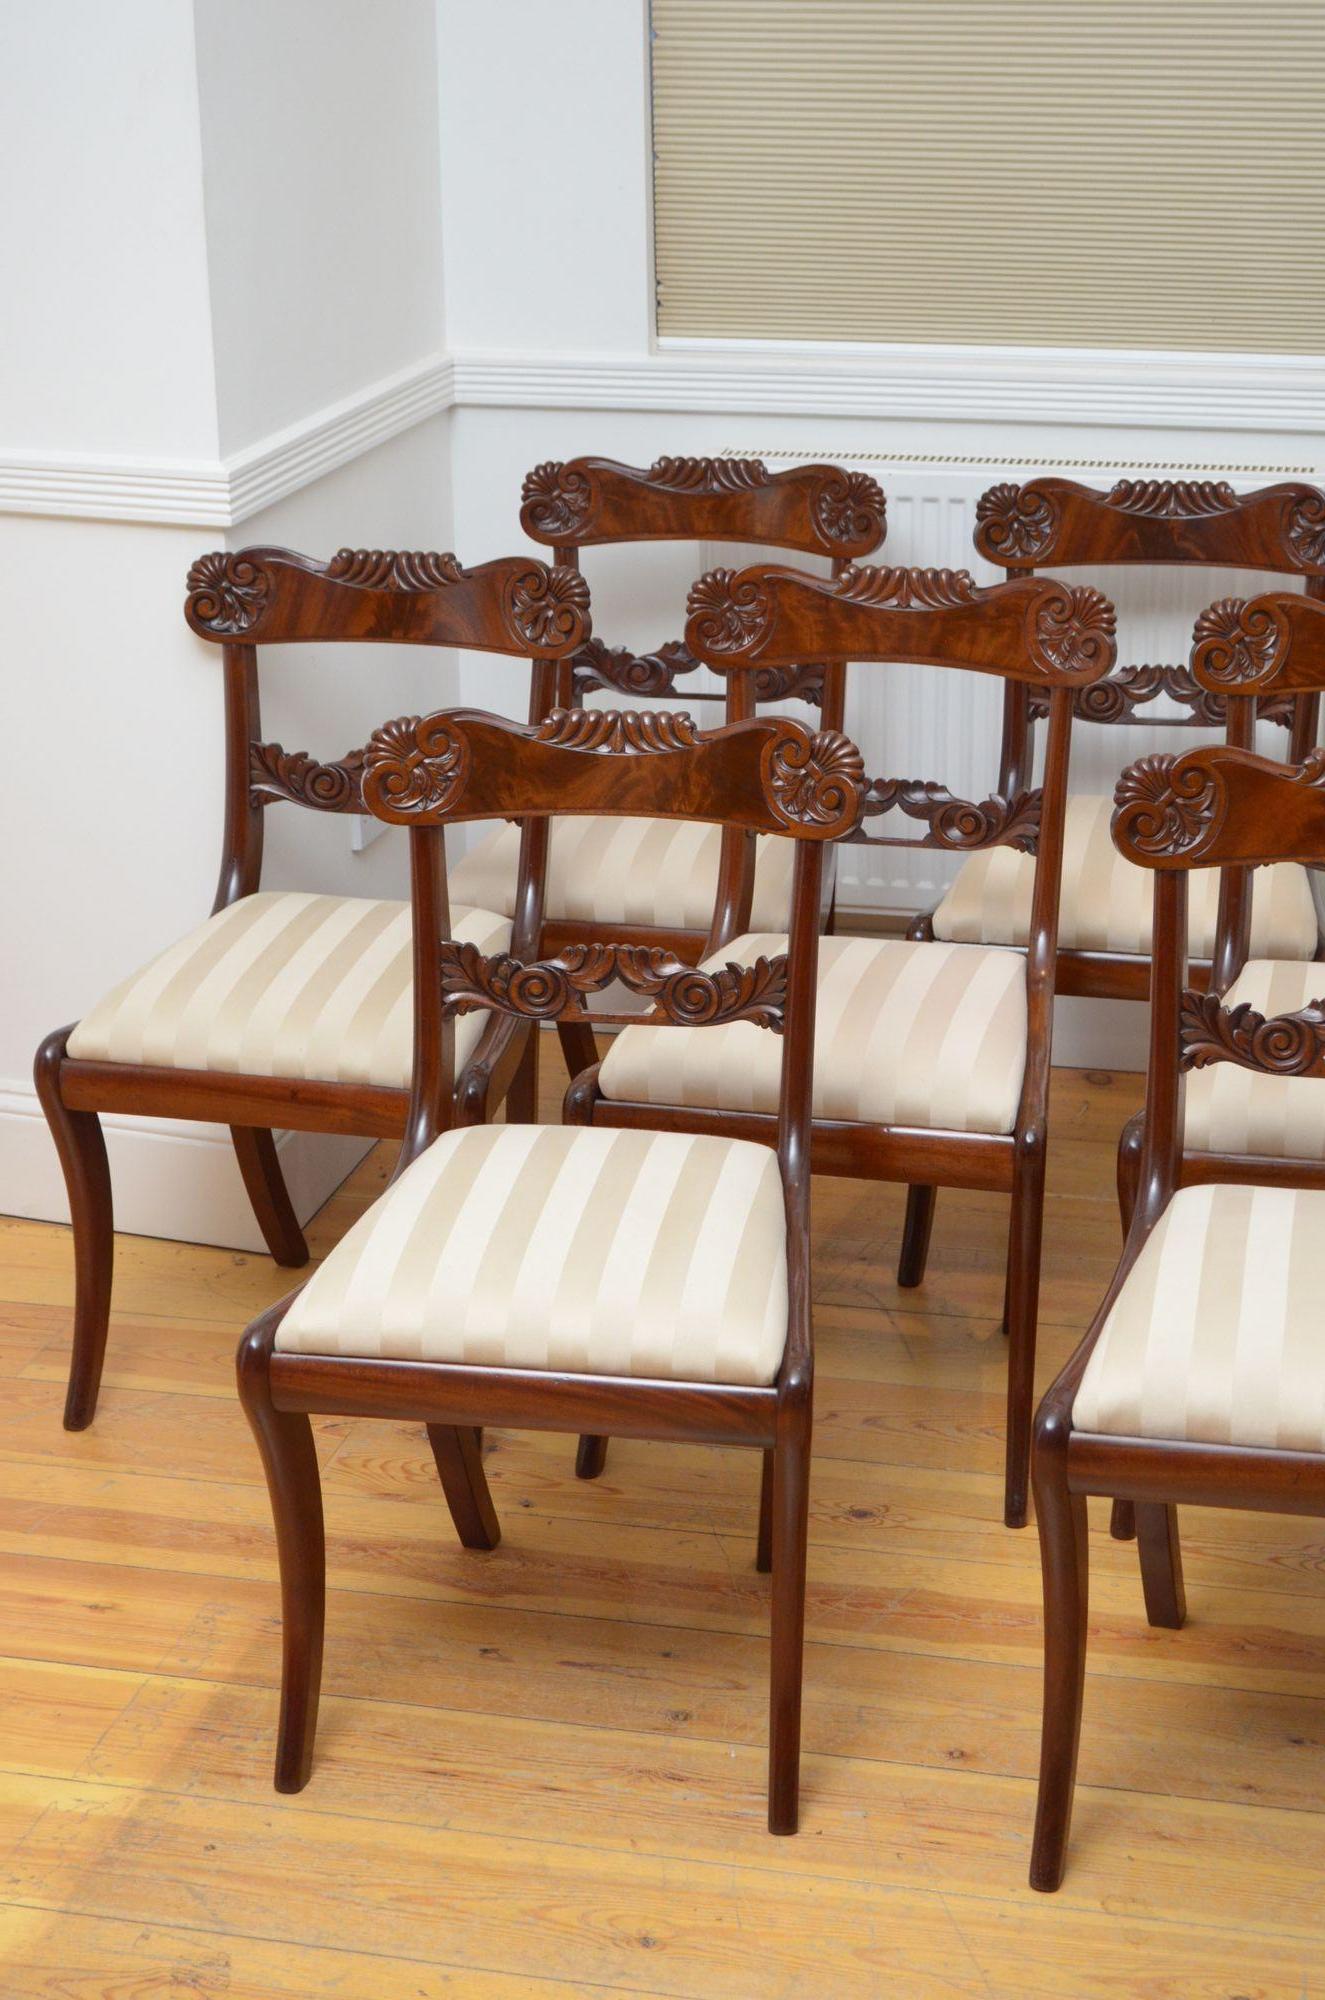 Sn4893 Fine quality set of twelve William IV dining chairs in mahogany, each chair having flamed mahogany top rail with fleur de lis carving and scroll carved mid rail above drop in seat covered in stripy cream fabric, all standing on saber legs.